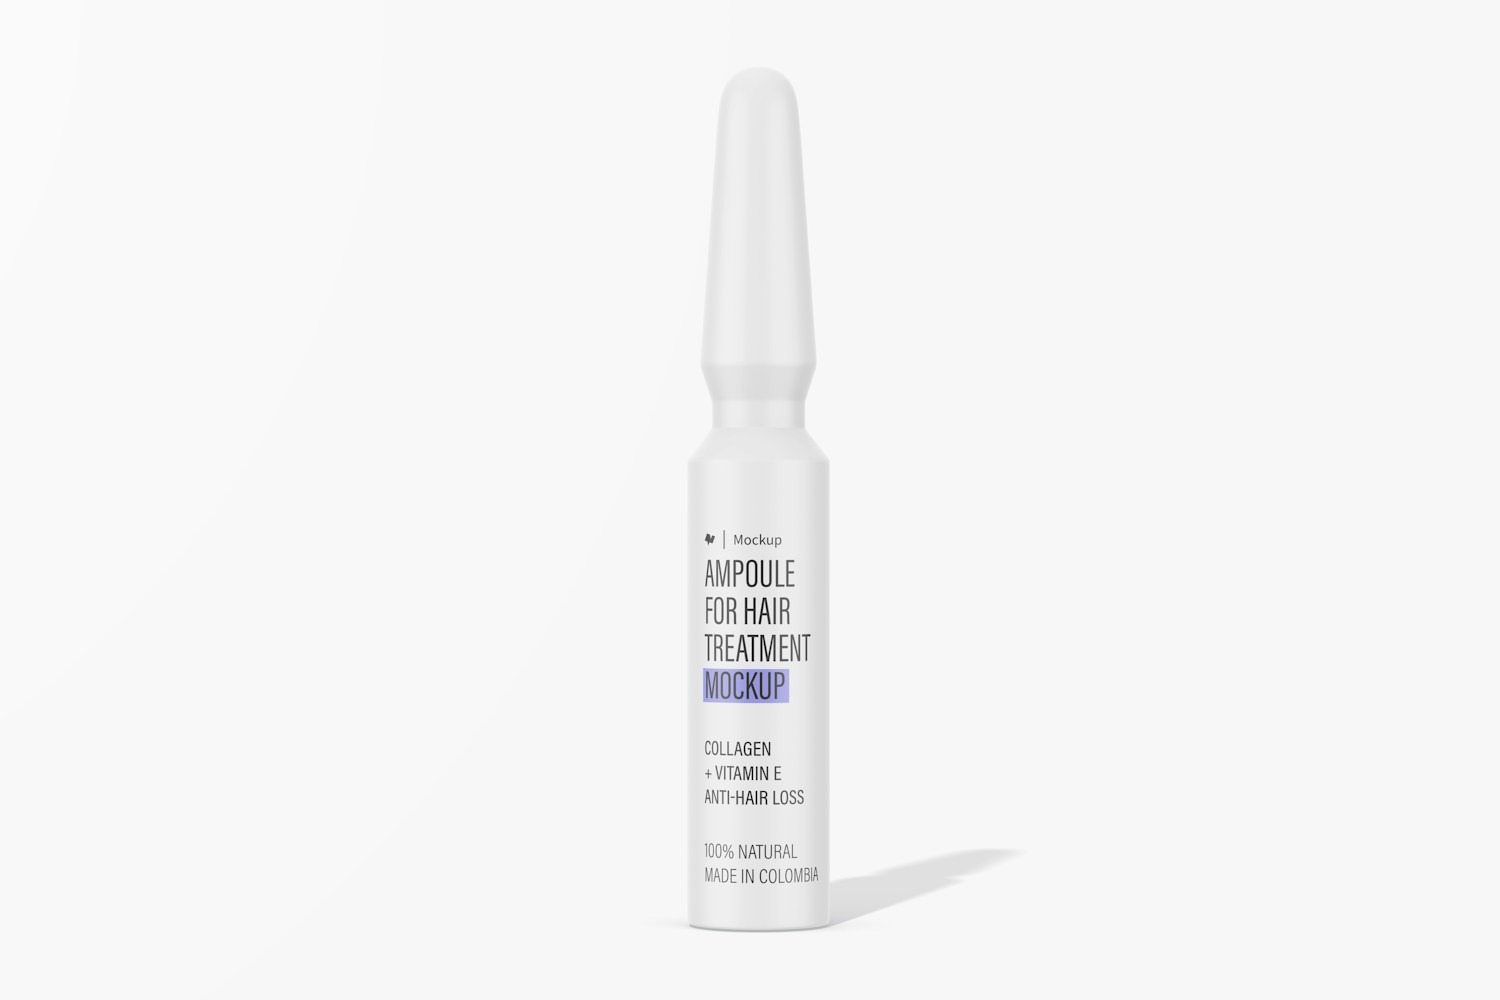 Ampoule for Hair Treatment Mockup, Front View